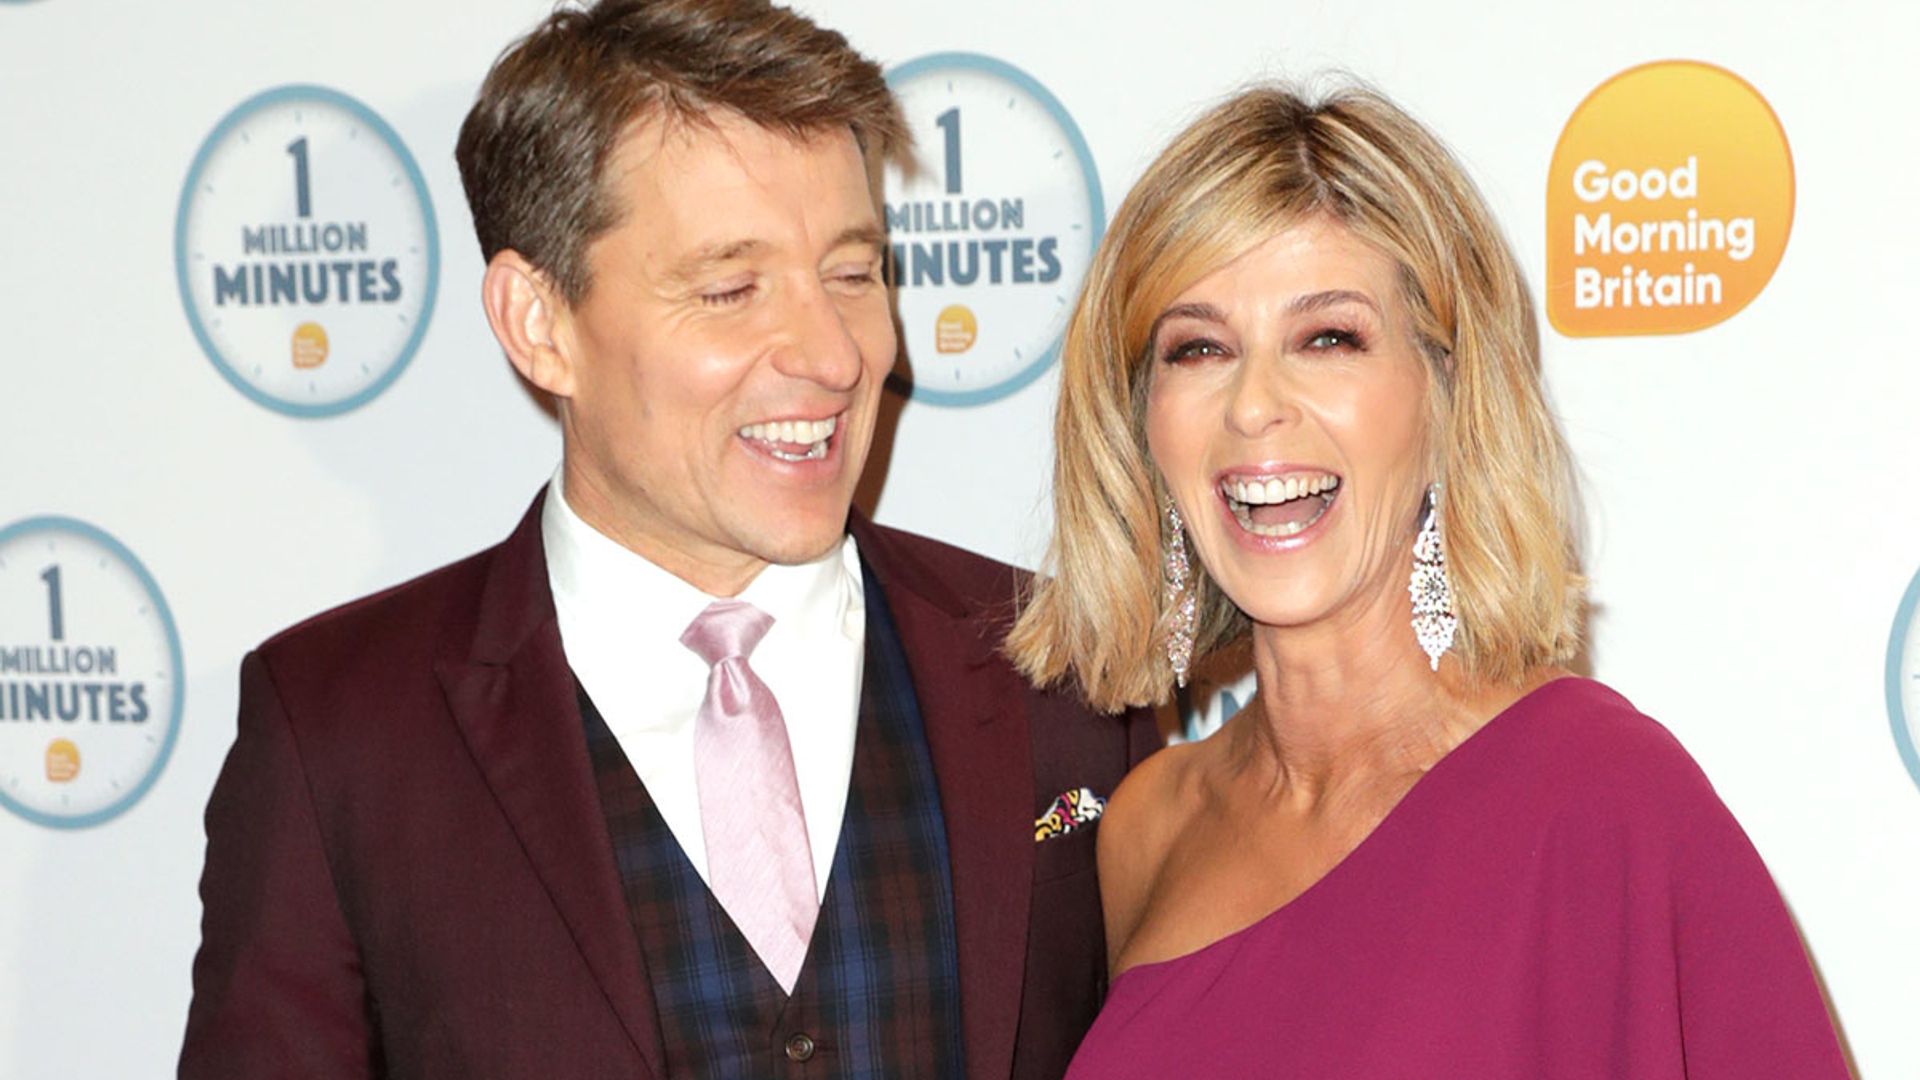 Good Morning Britain S Ben Shephard Reveals Why He Adores Kate Garraway So Much Hello